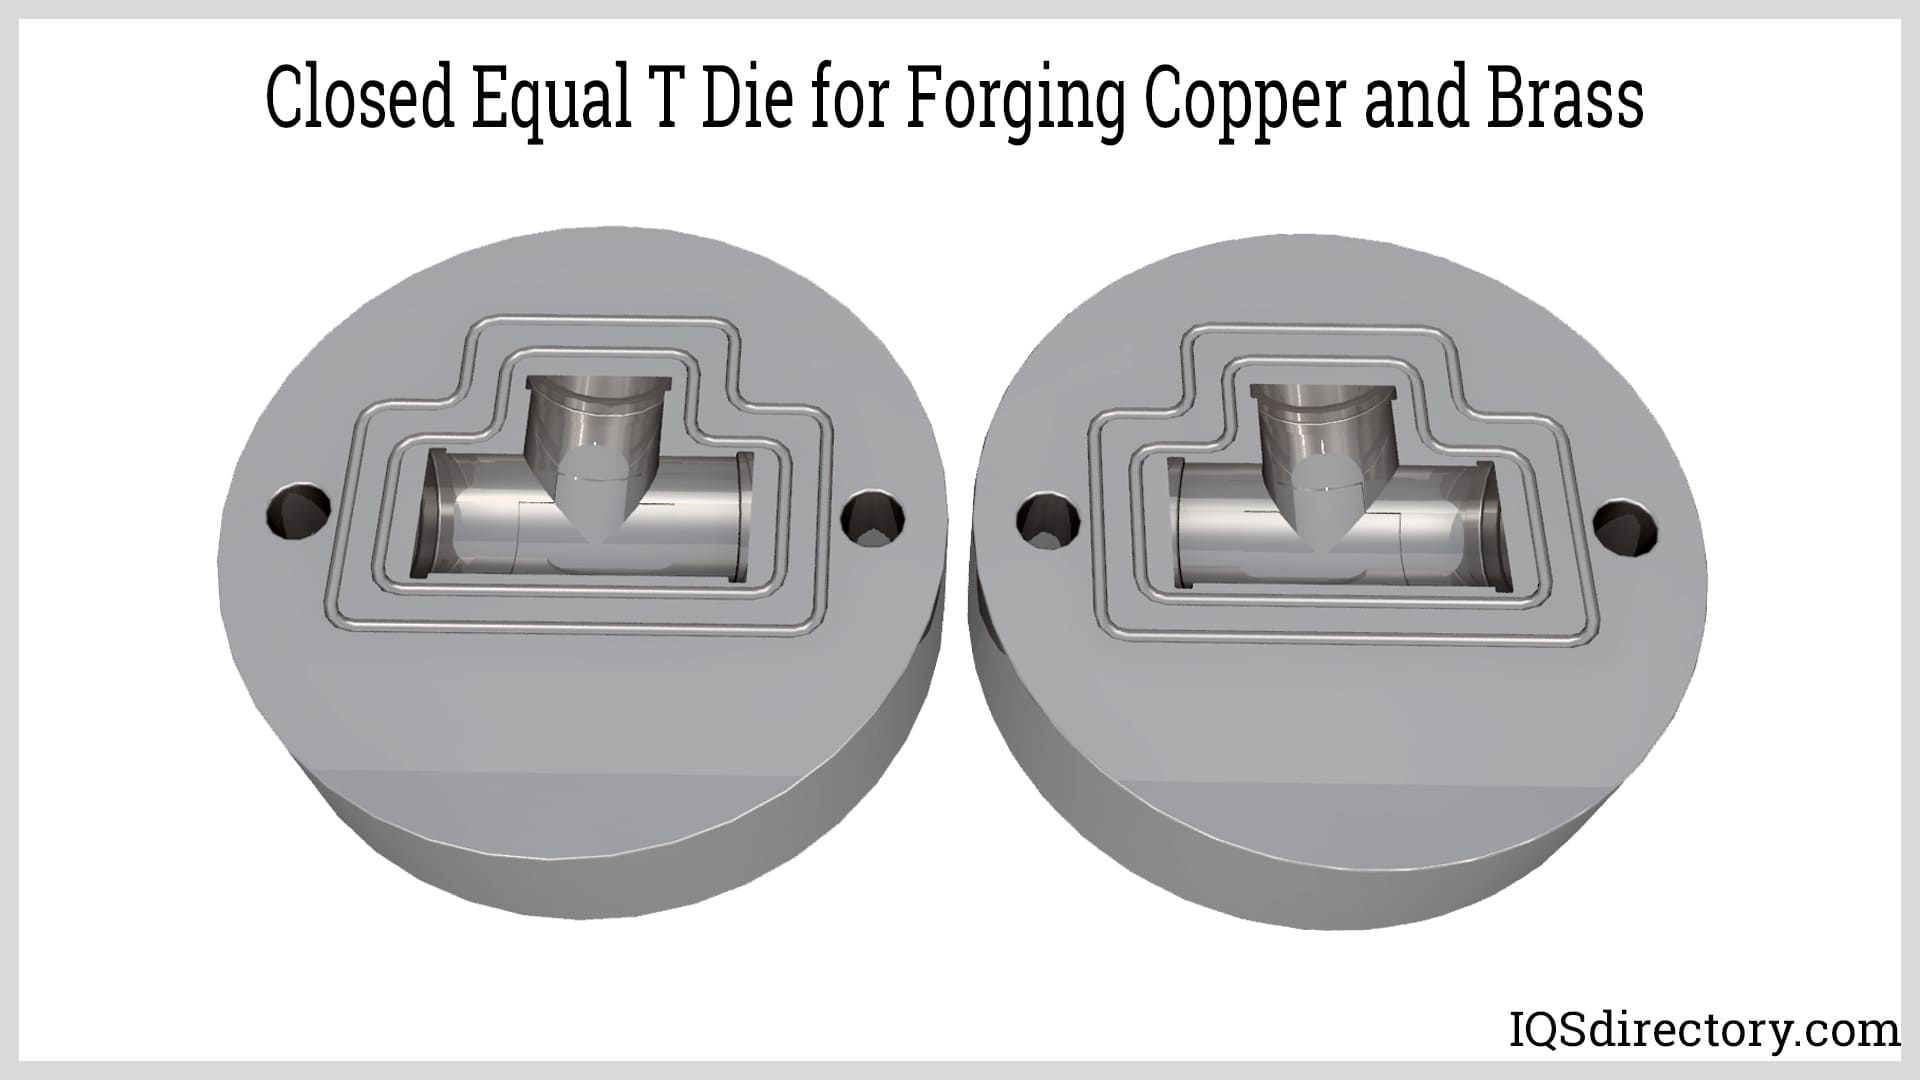 Closed Equal T Die for Forging Copper and Brass